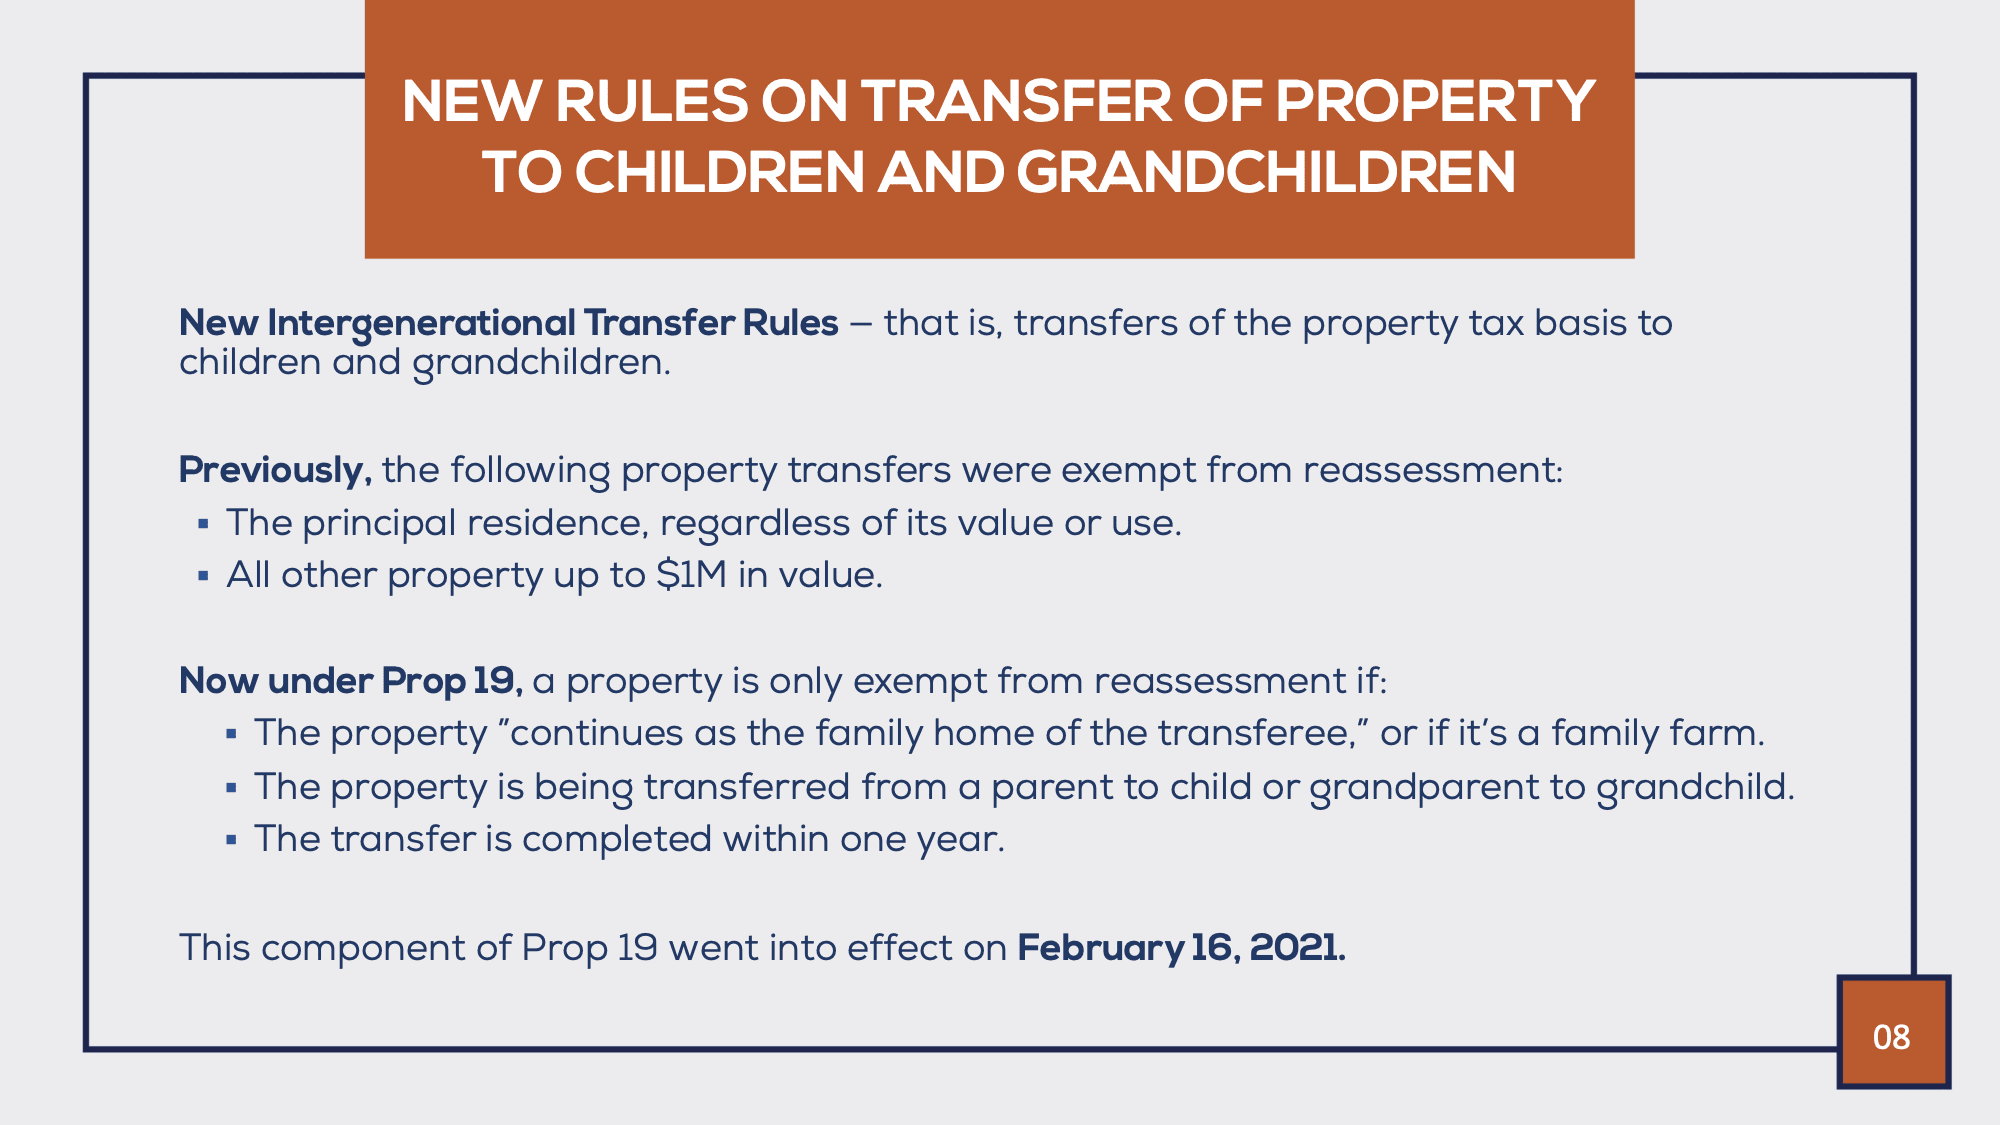 New rules for transferring property to children or grandchildren for Proposition 19